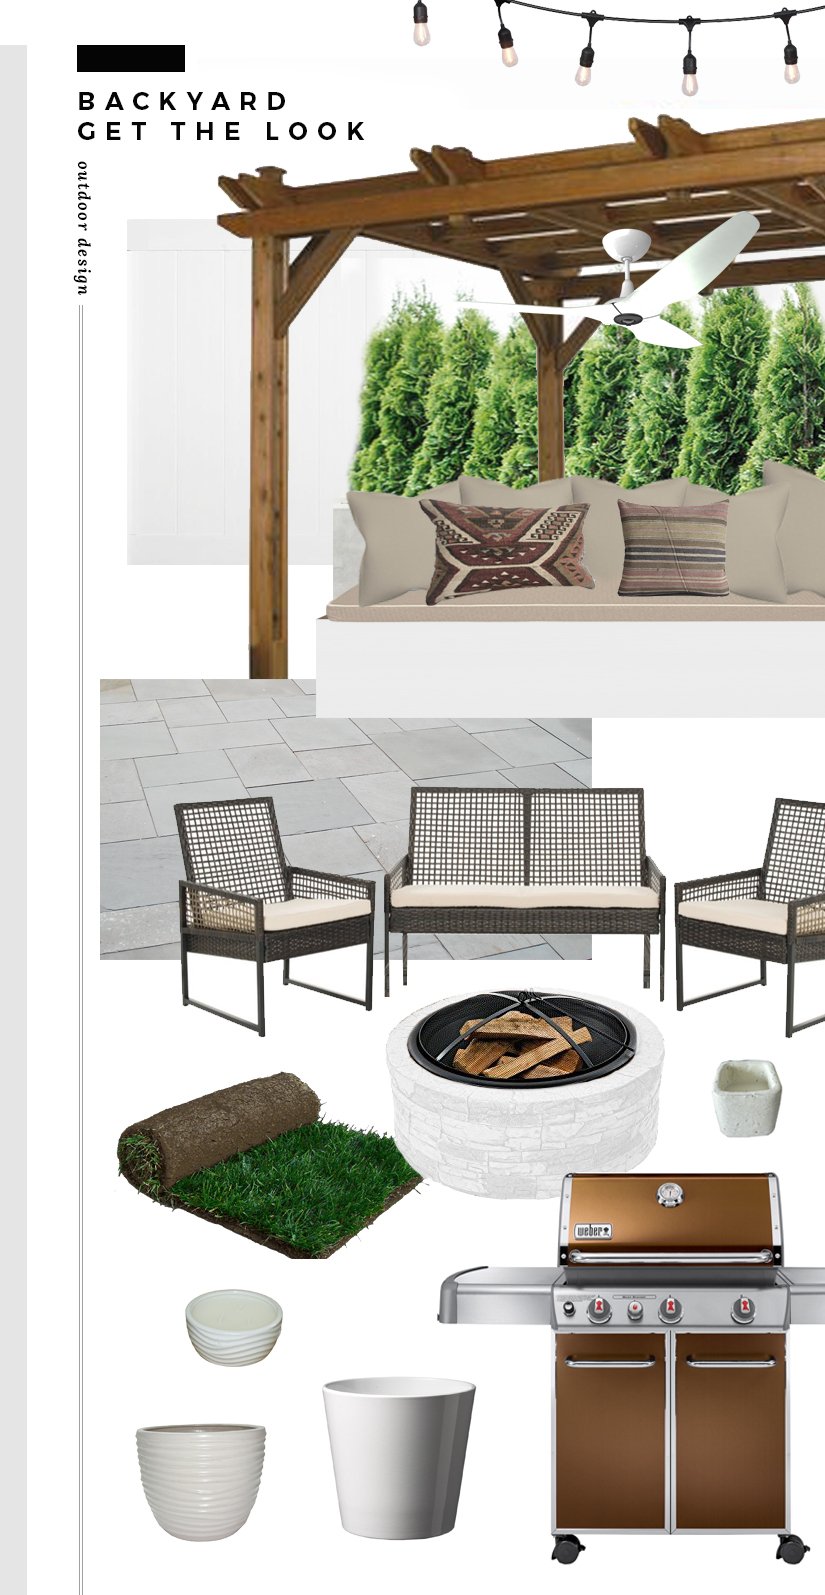 Our Backyard Reveal Get The Look Room For Tuesday